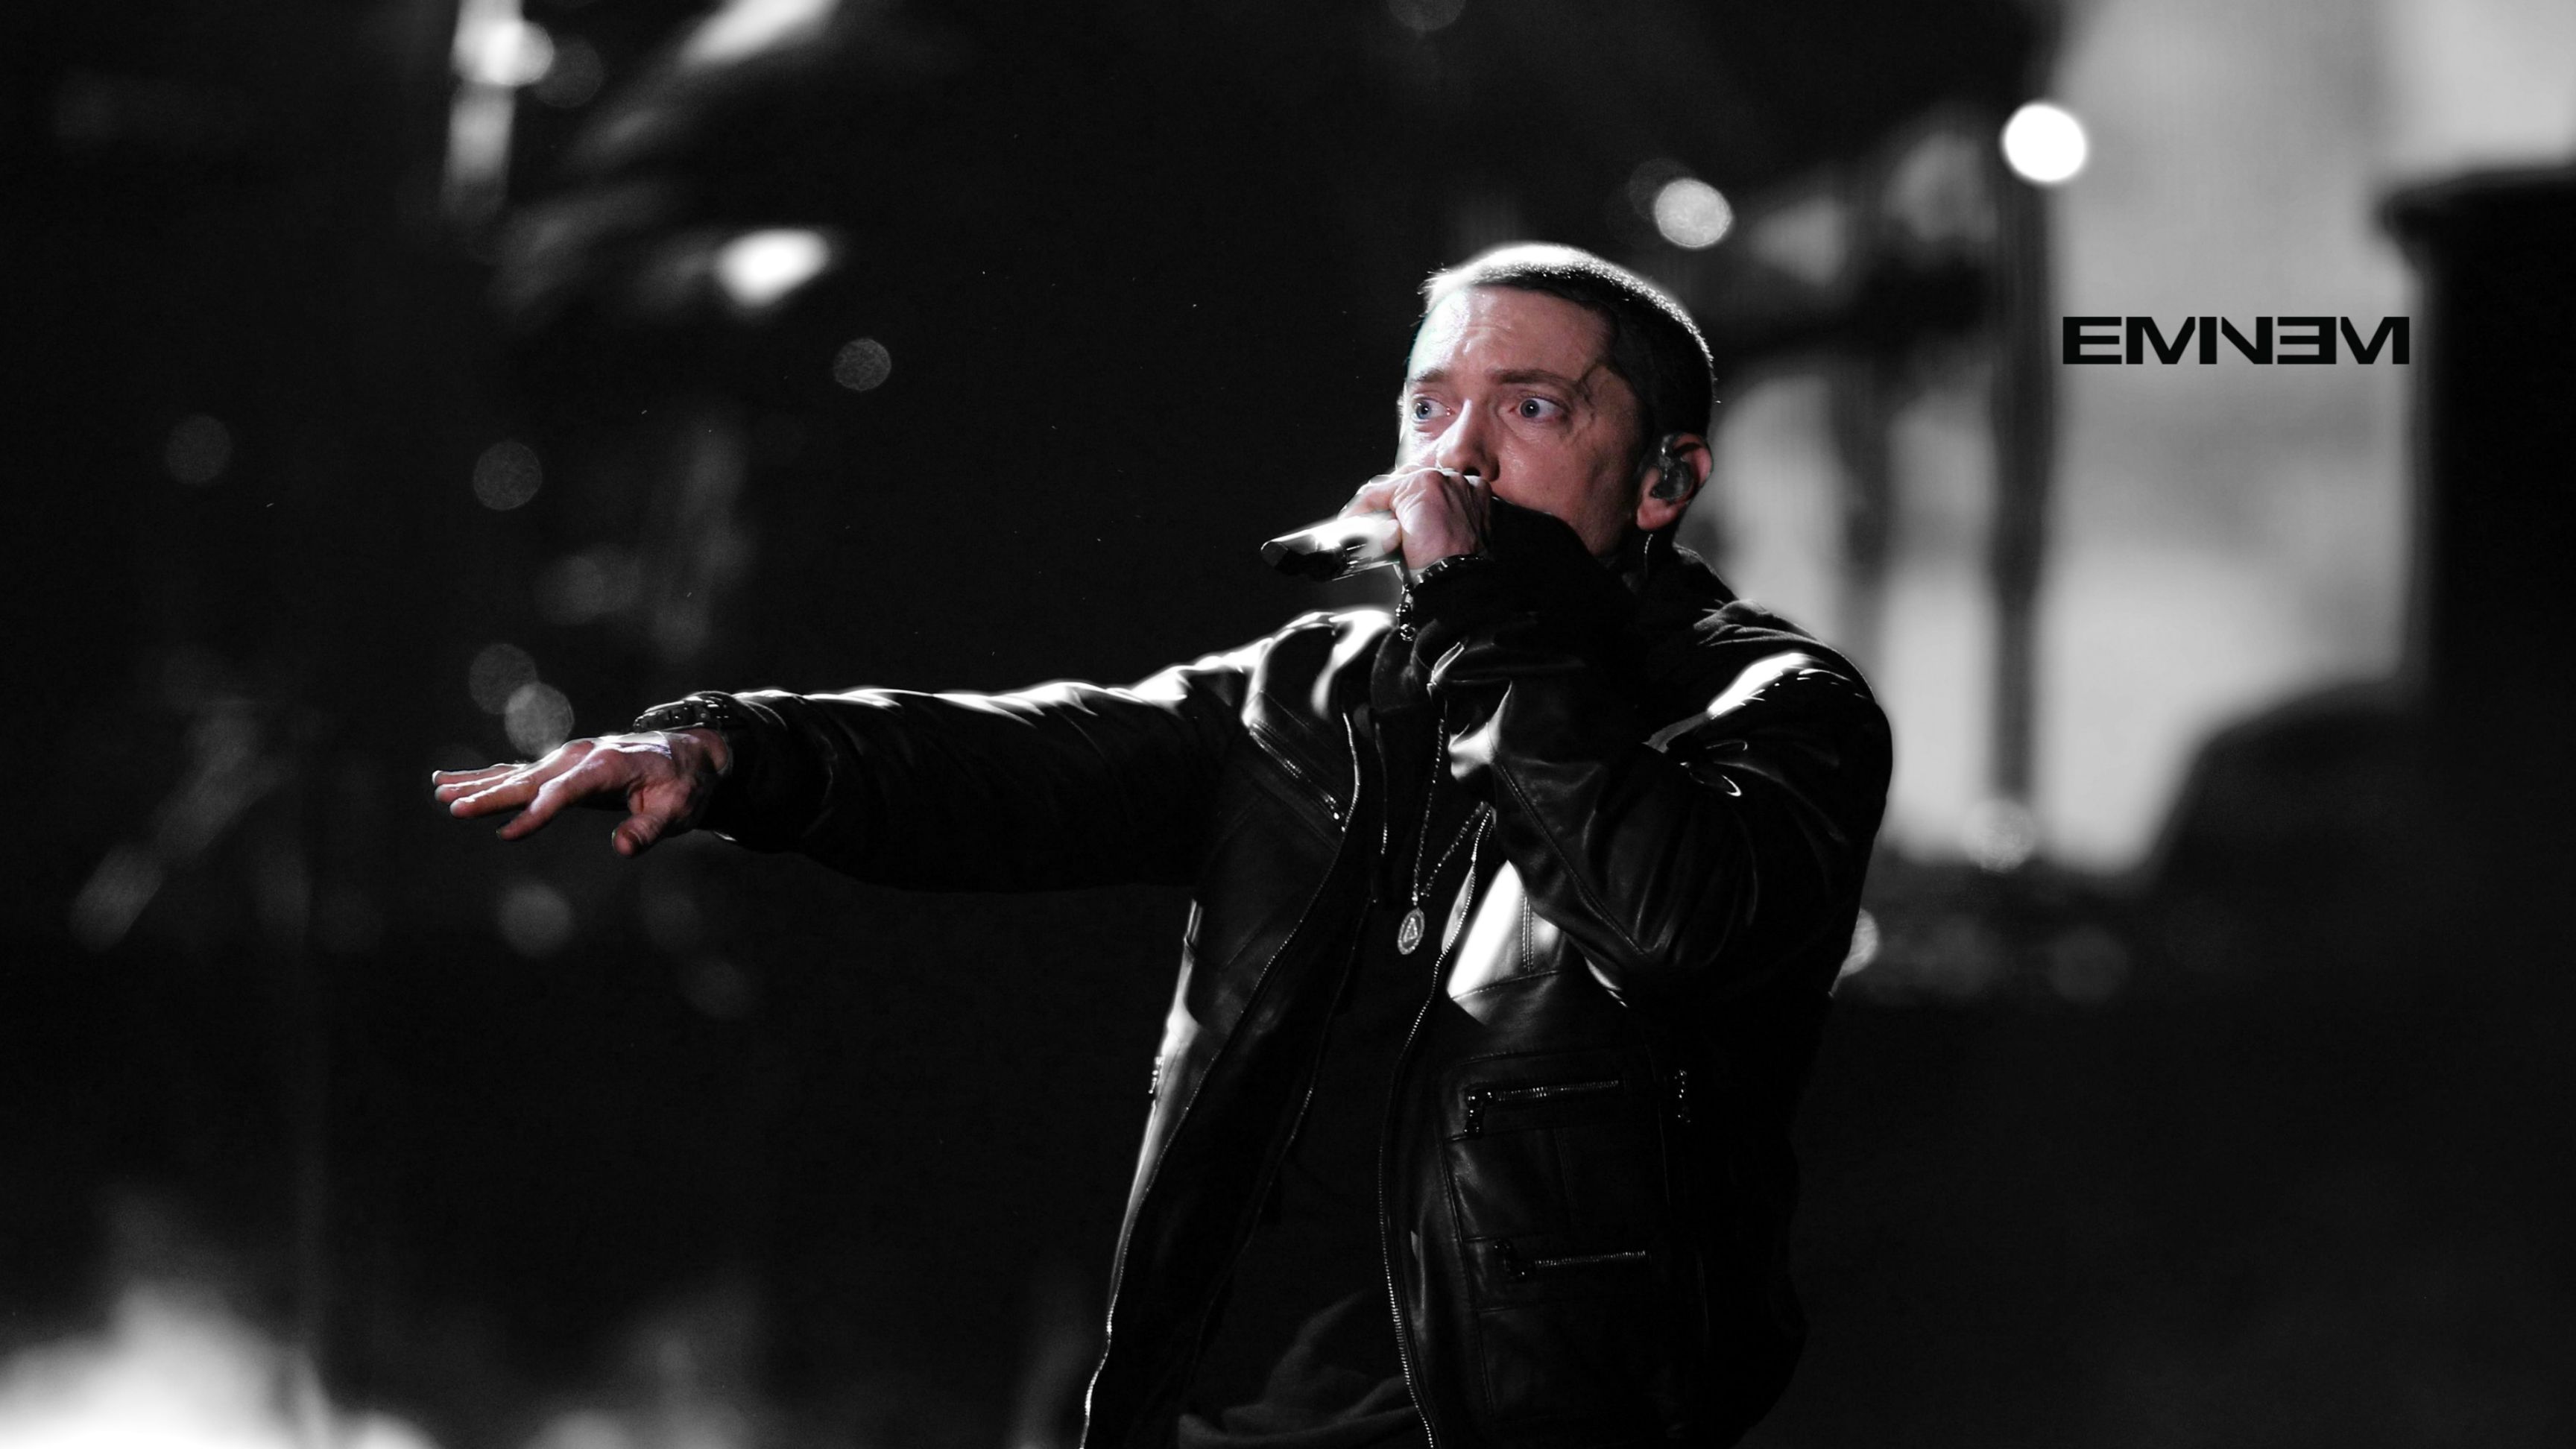 I Wanted To Create An Eminem Wallpaper For My Pc Here S The